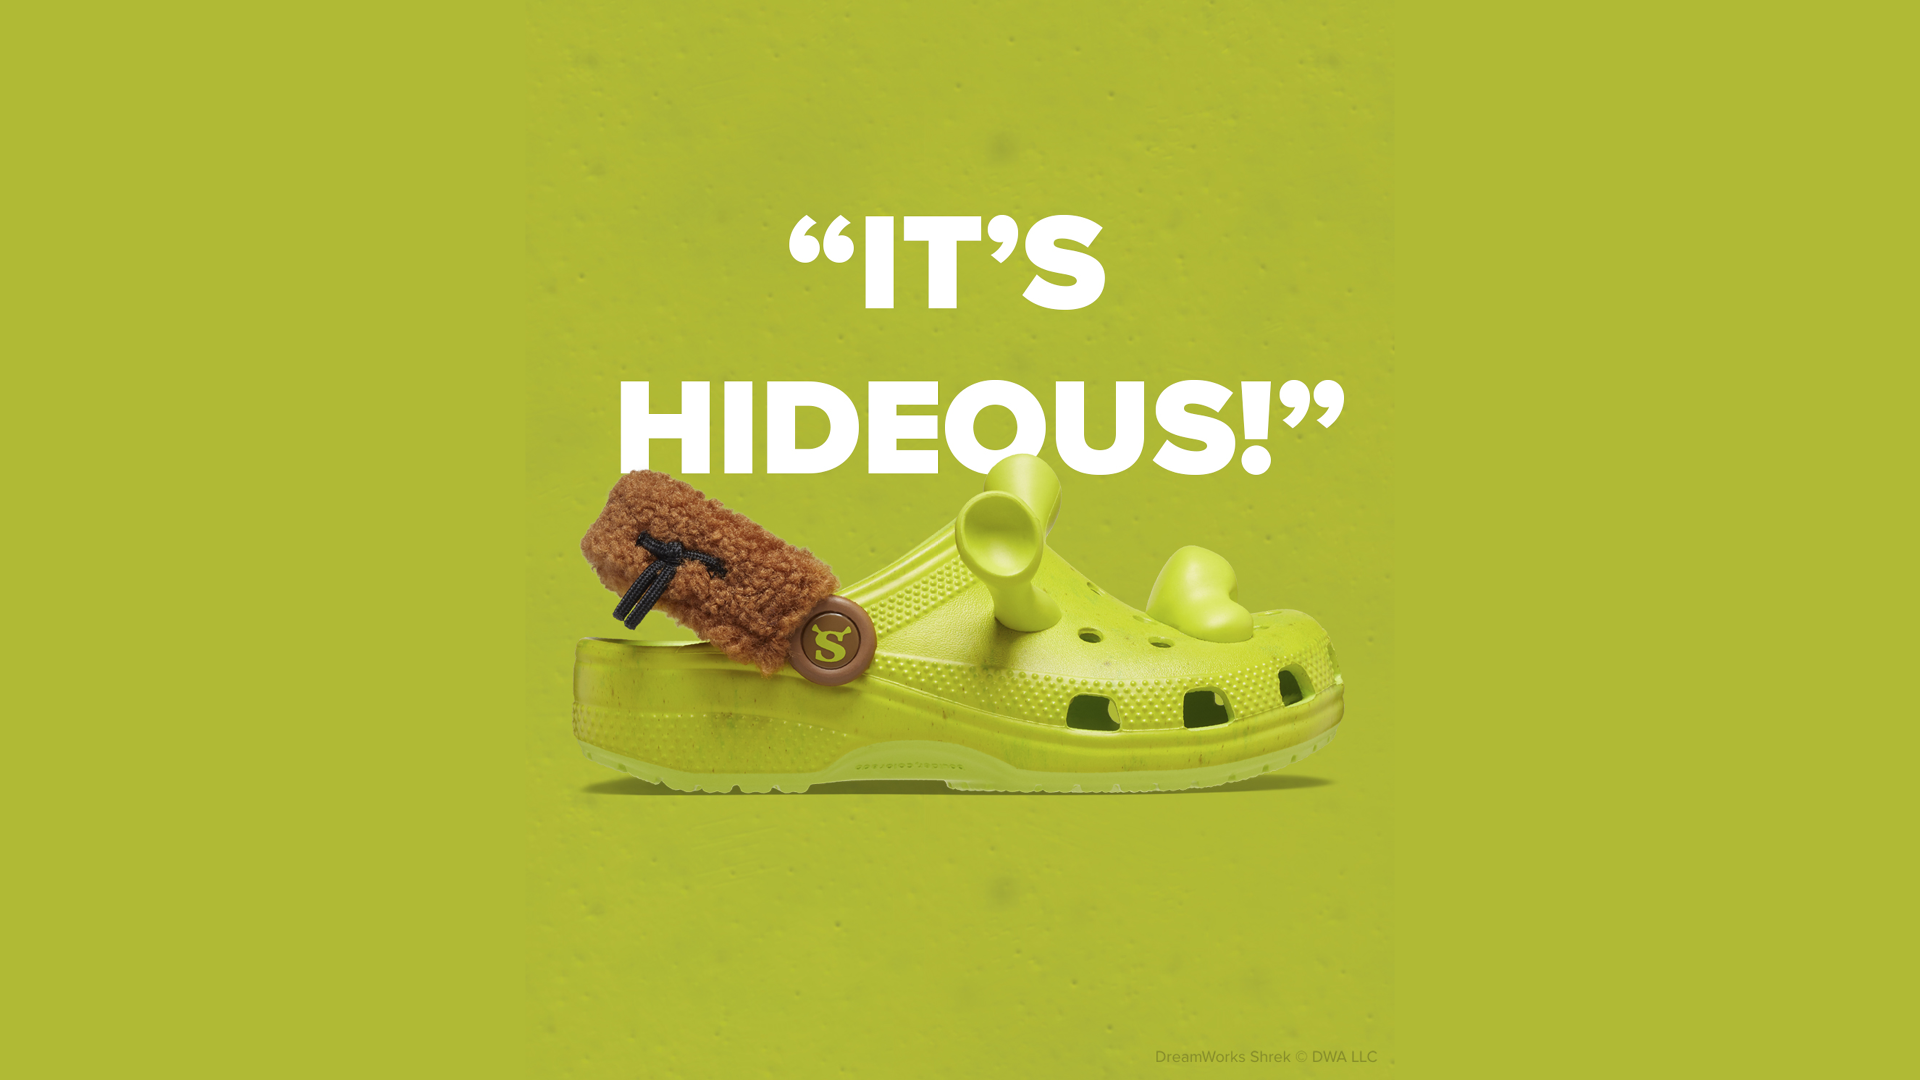 Shrek X Crocs  Shroc Review From The Inside Out 